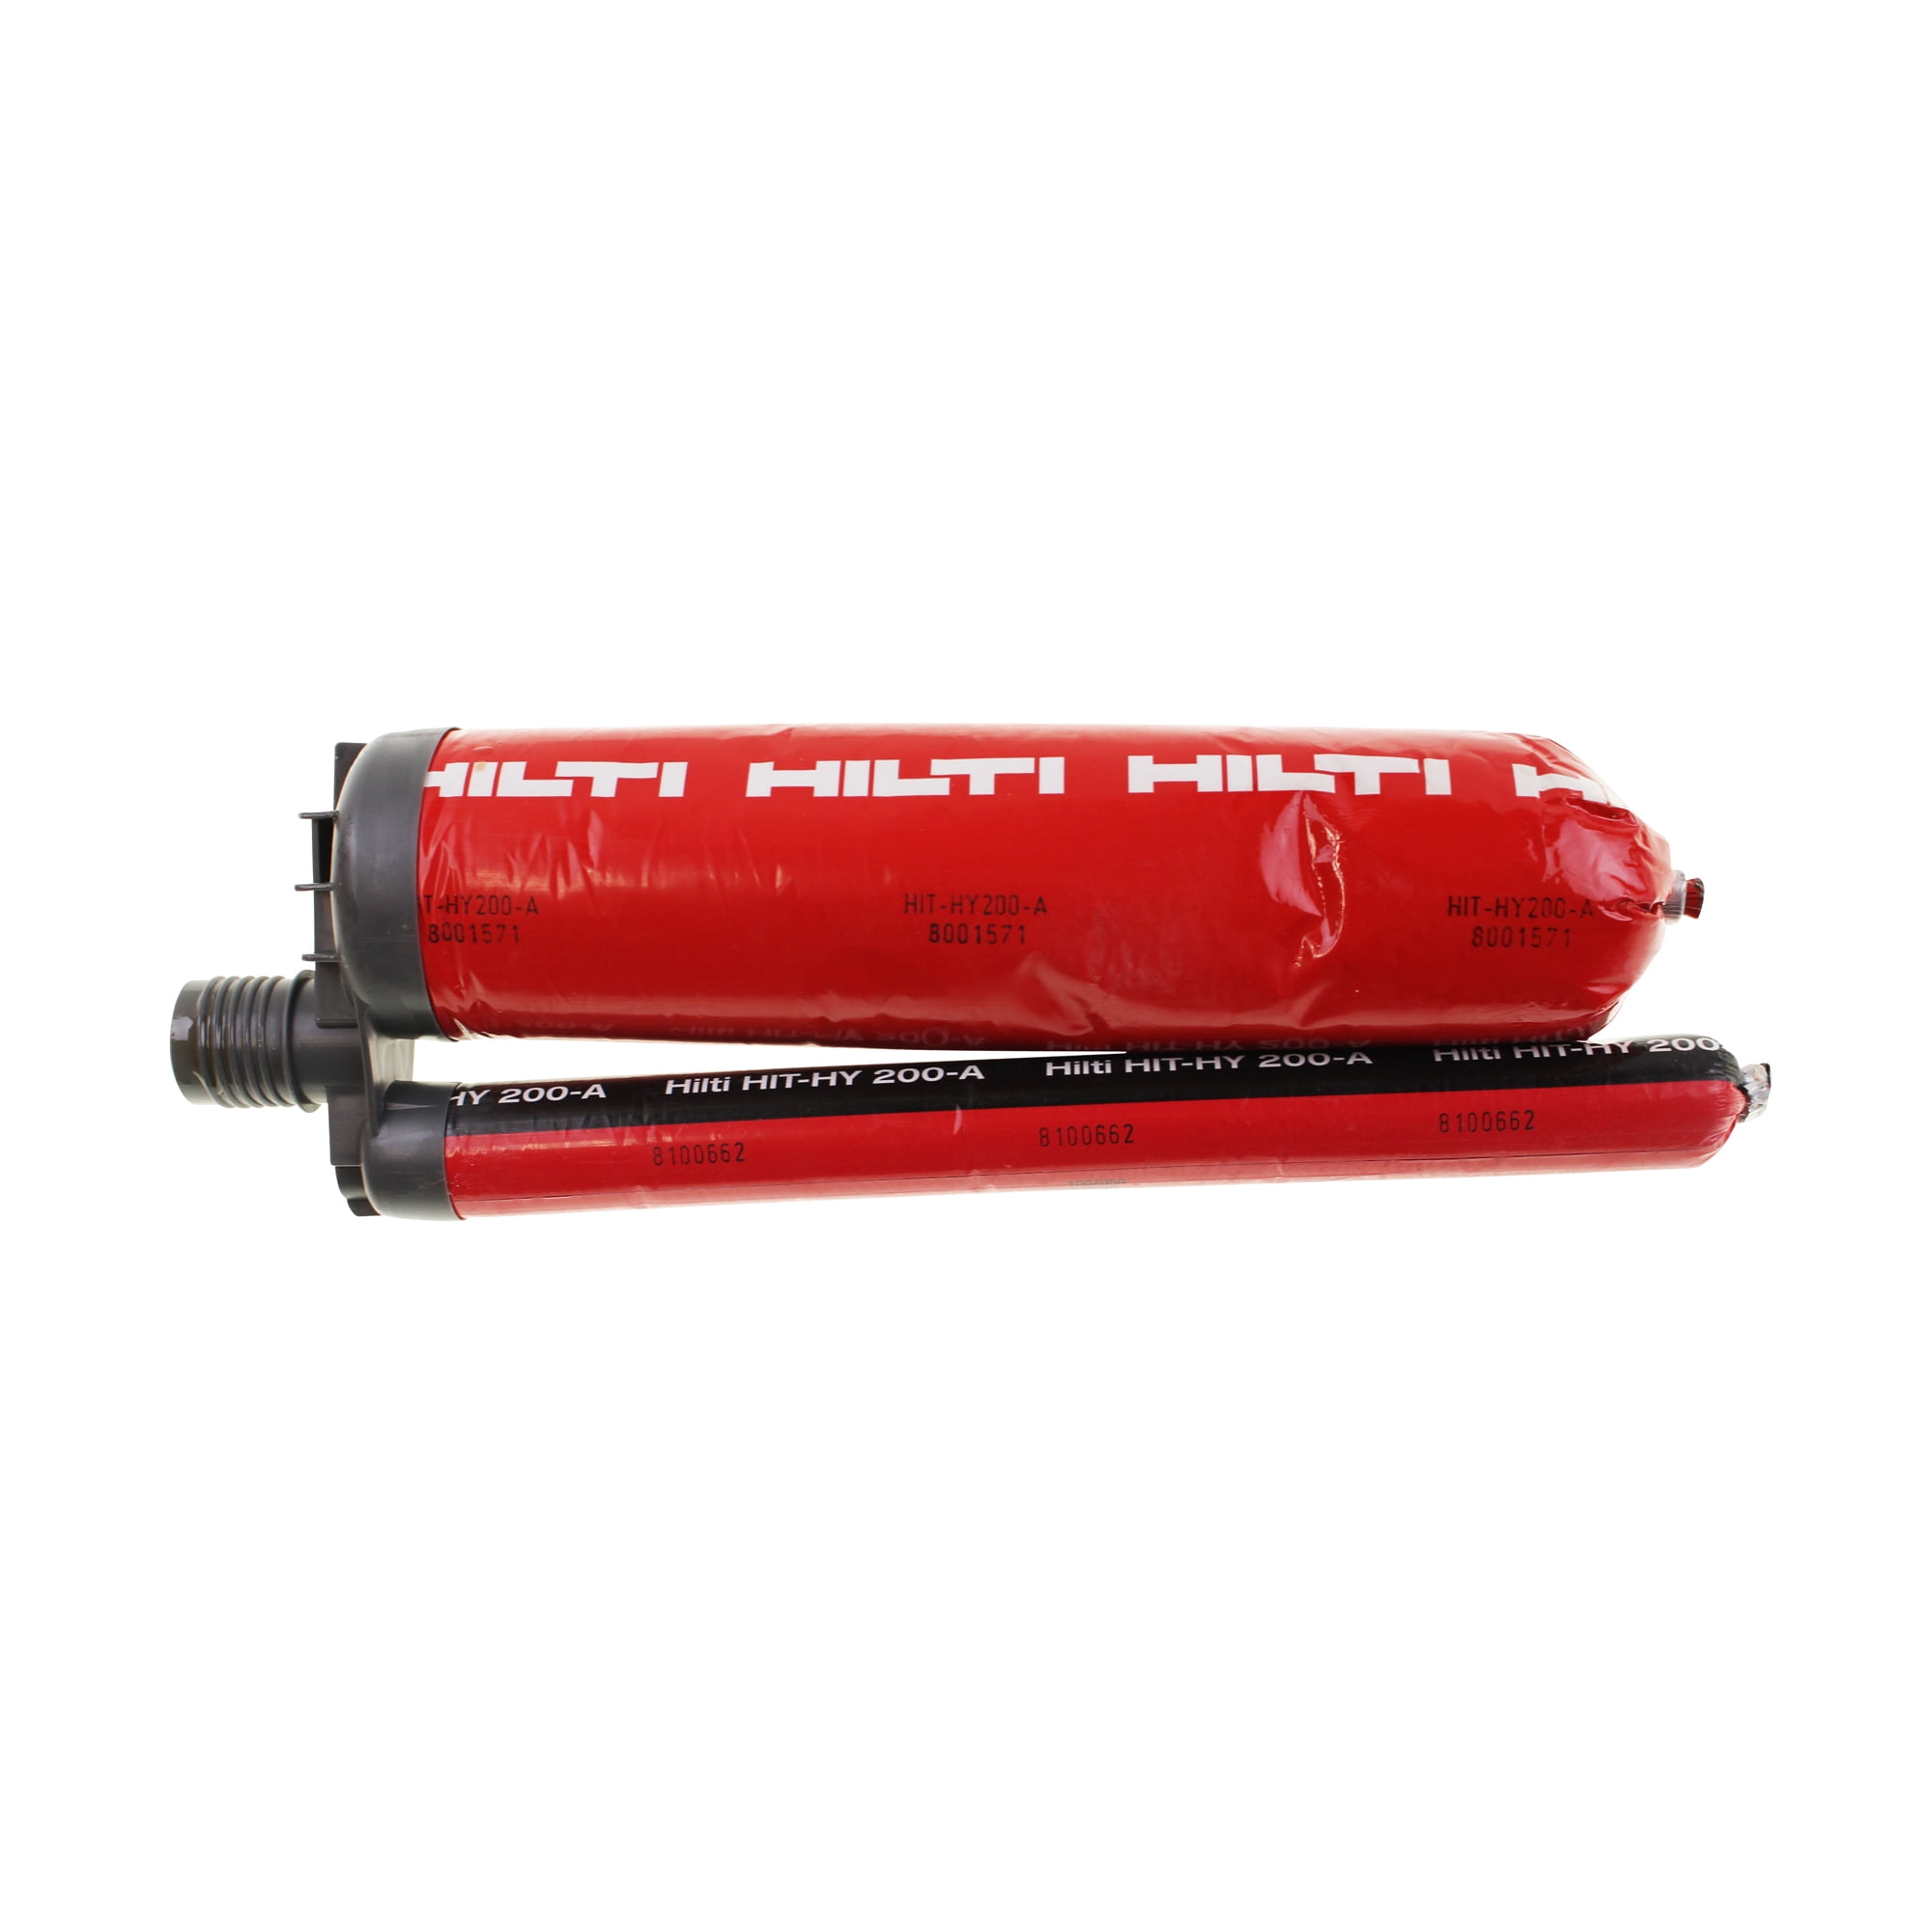 HILTI Injectable mortar HIT-HY 200-A 330/2 Item #2022696 330 ml